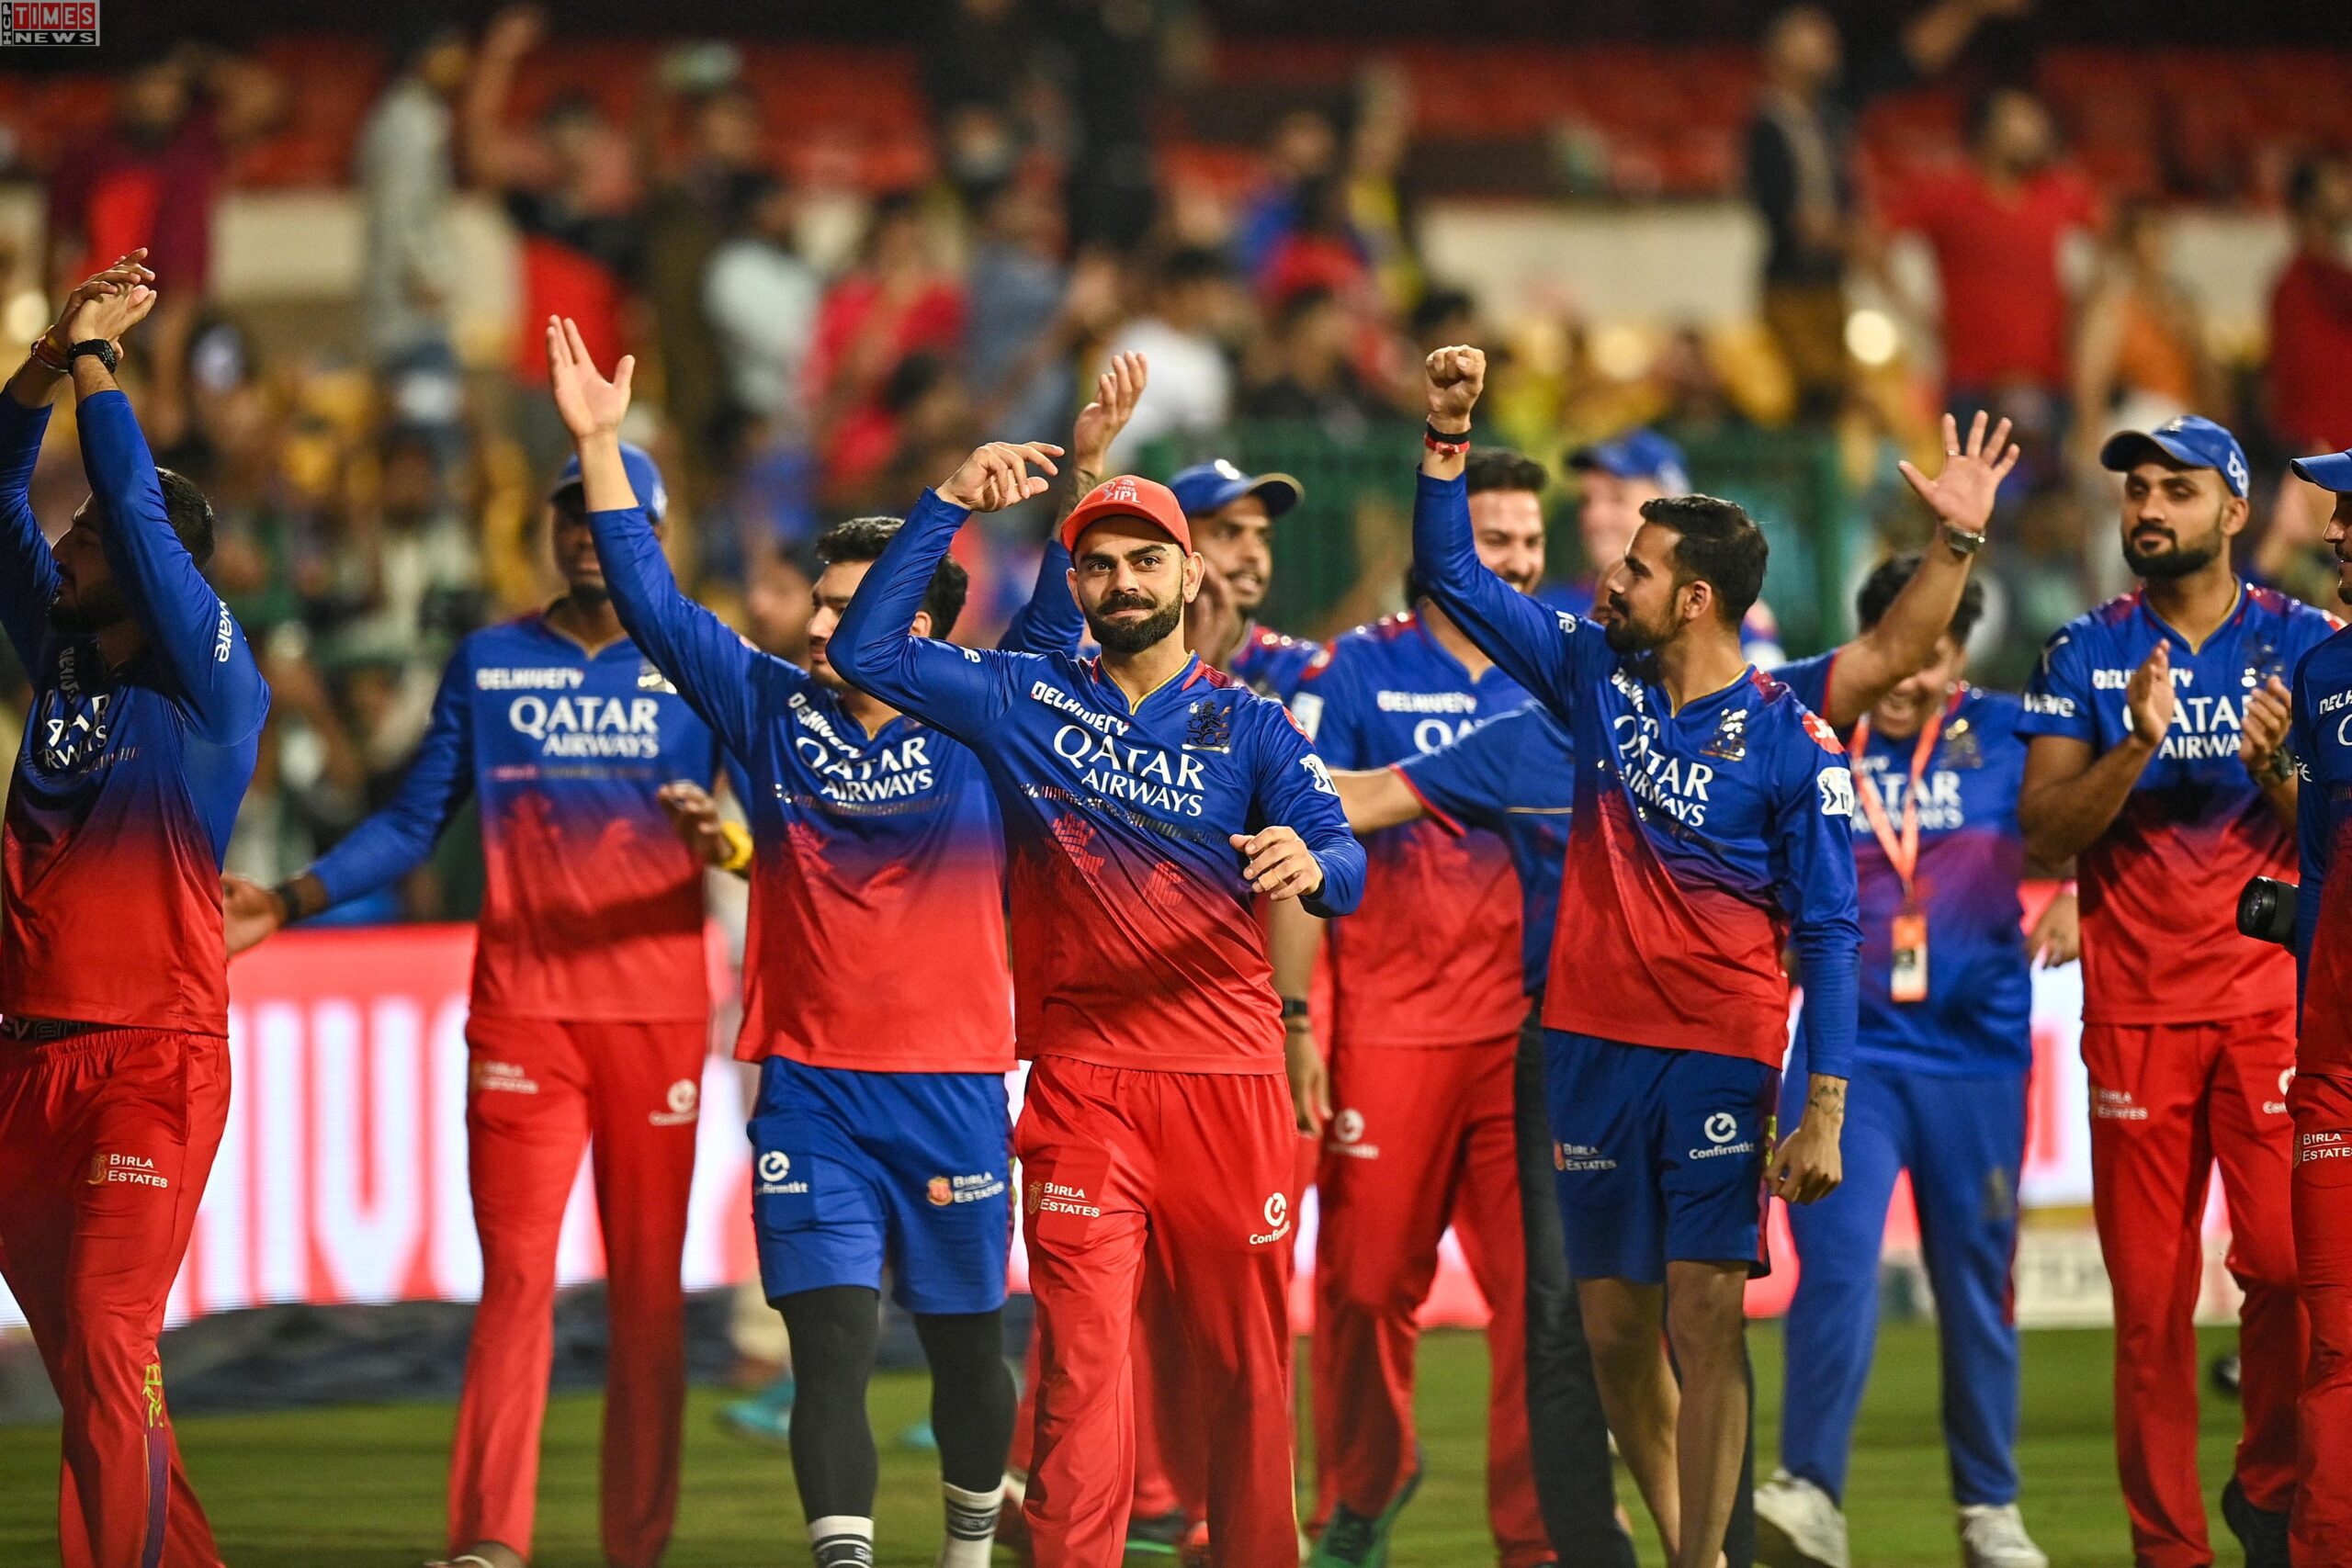 "When We Were Losing...": RCB Star Opens Up About Emotional Journey